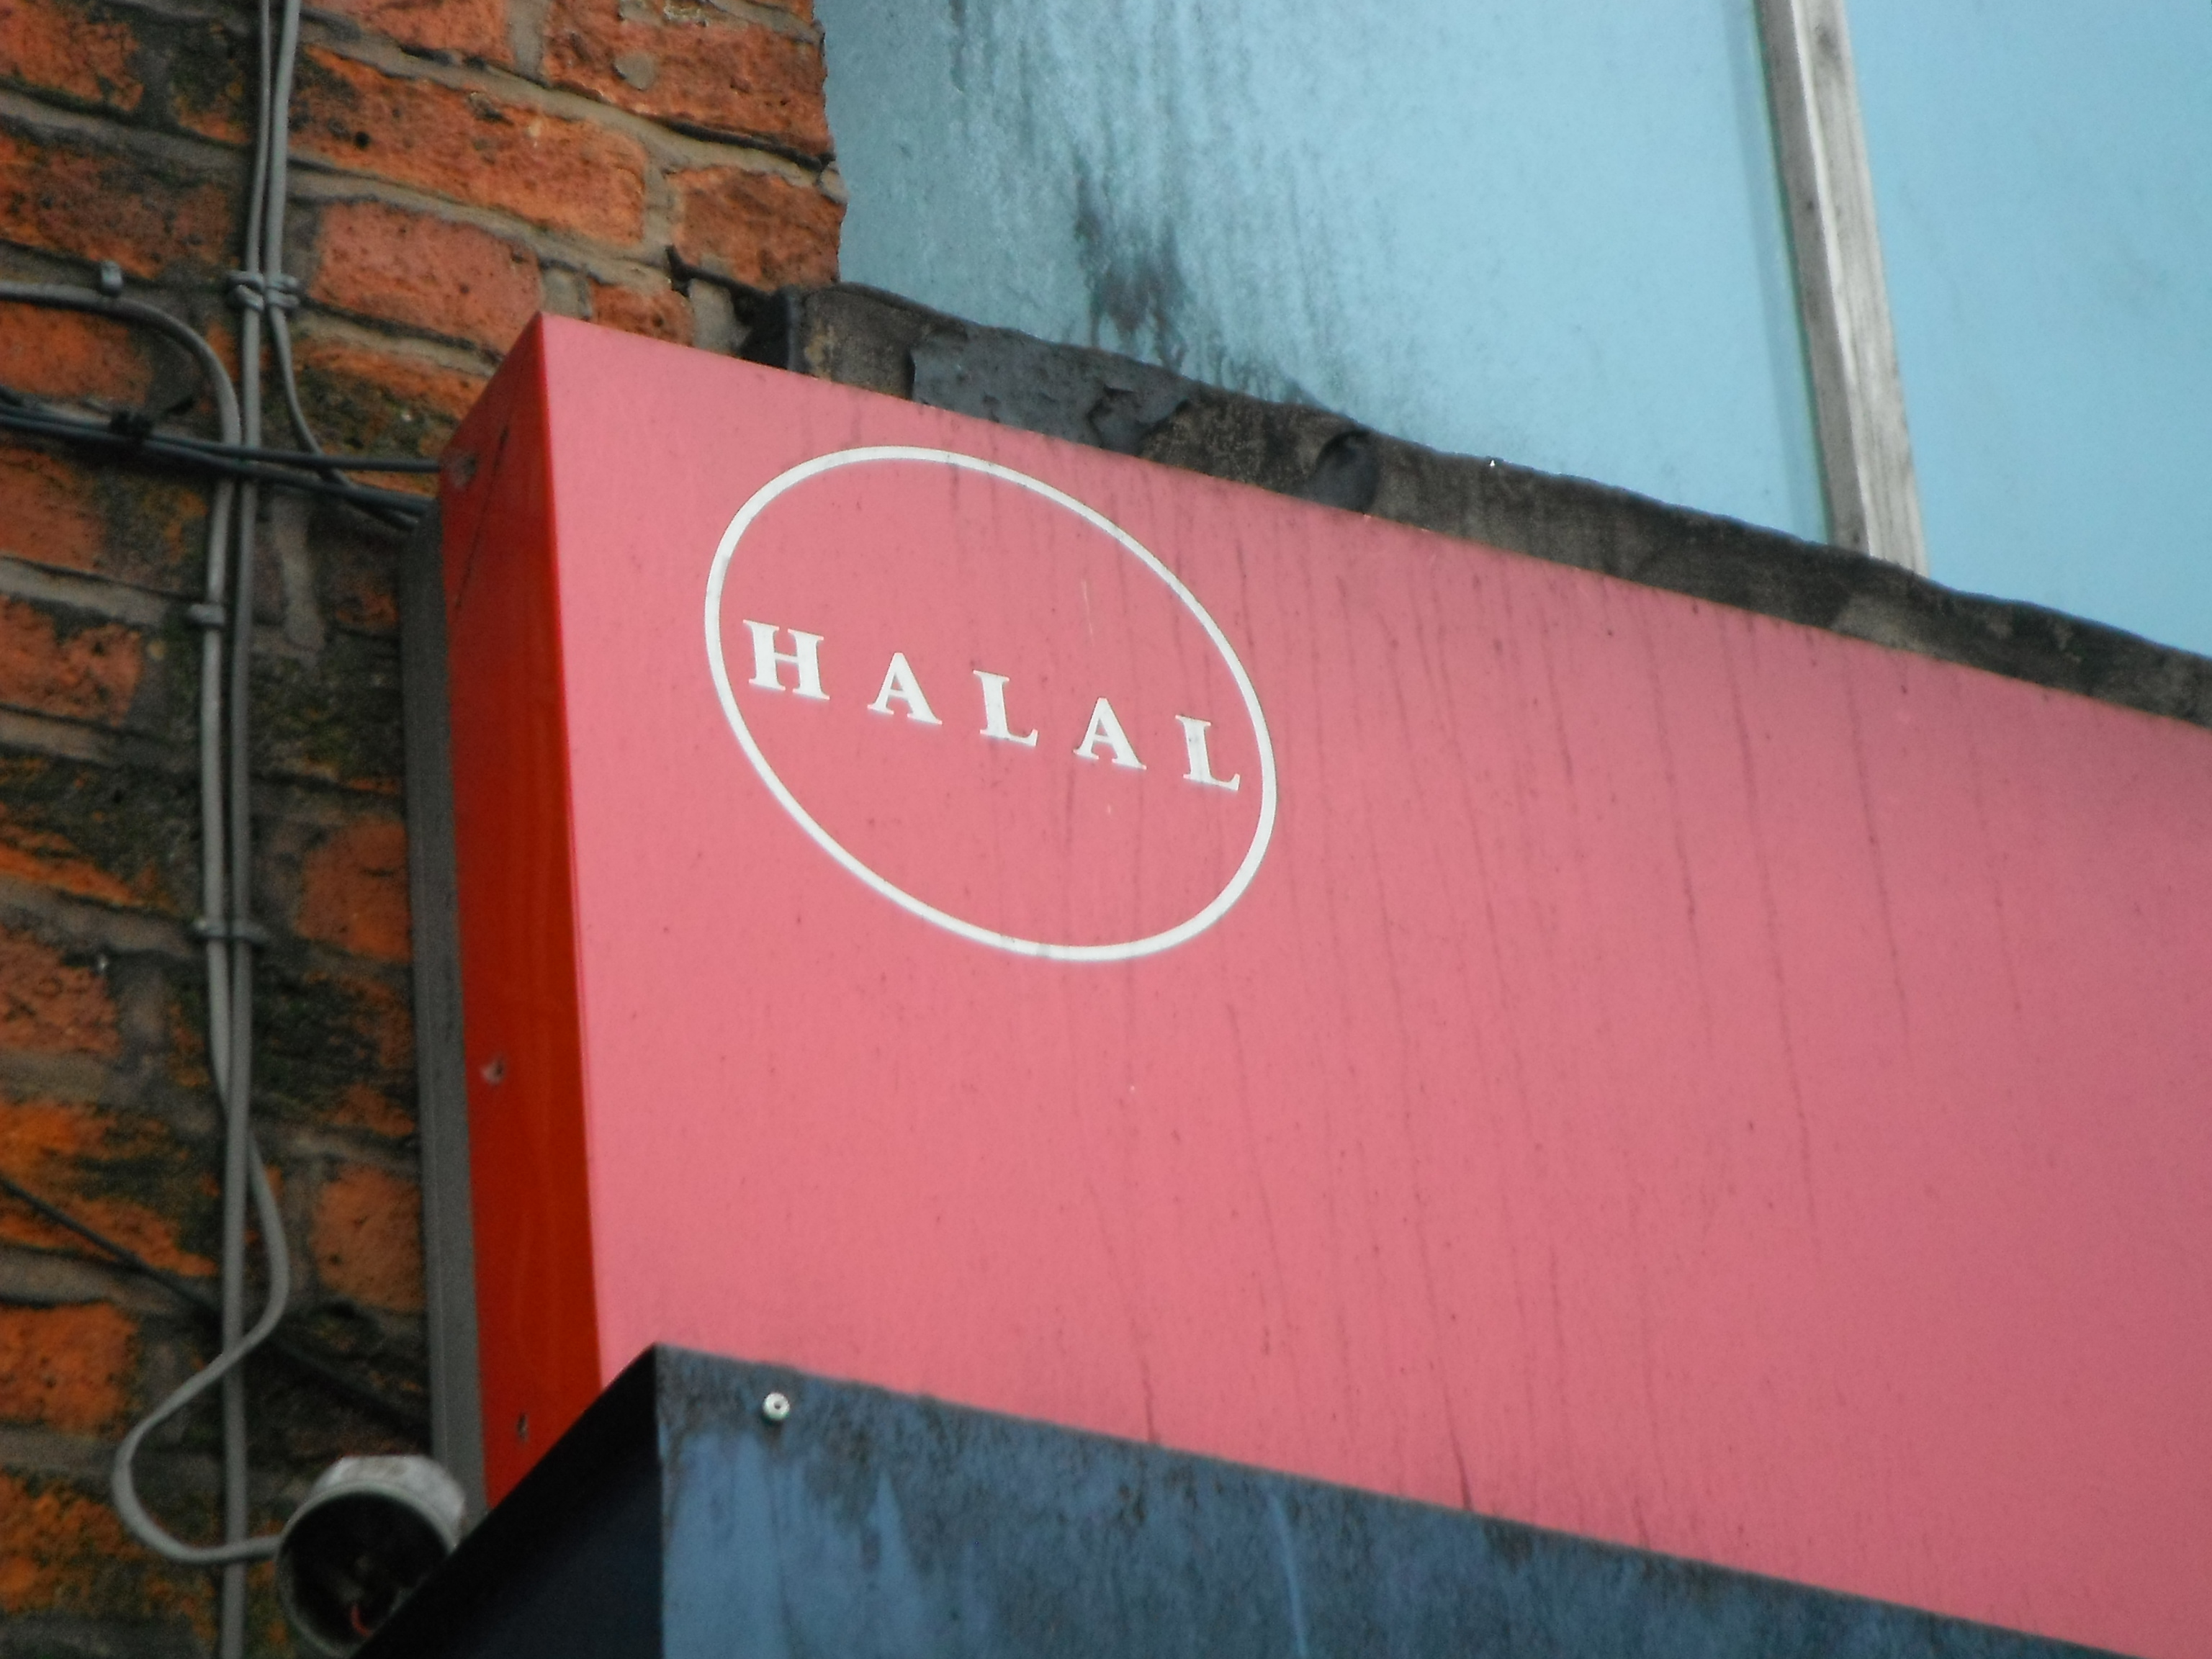 Photo taken by me – Halal food sign outside a Manchester restaurant 